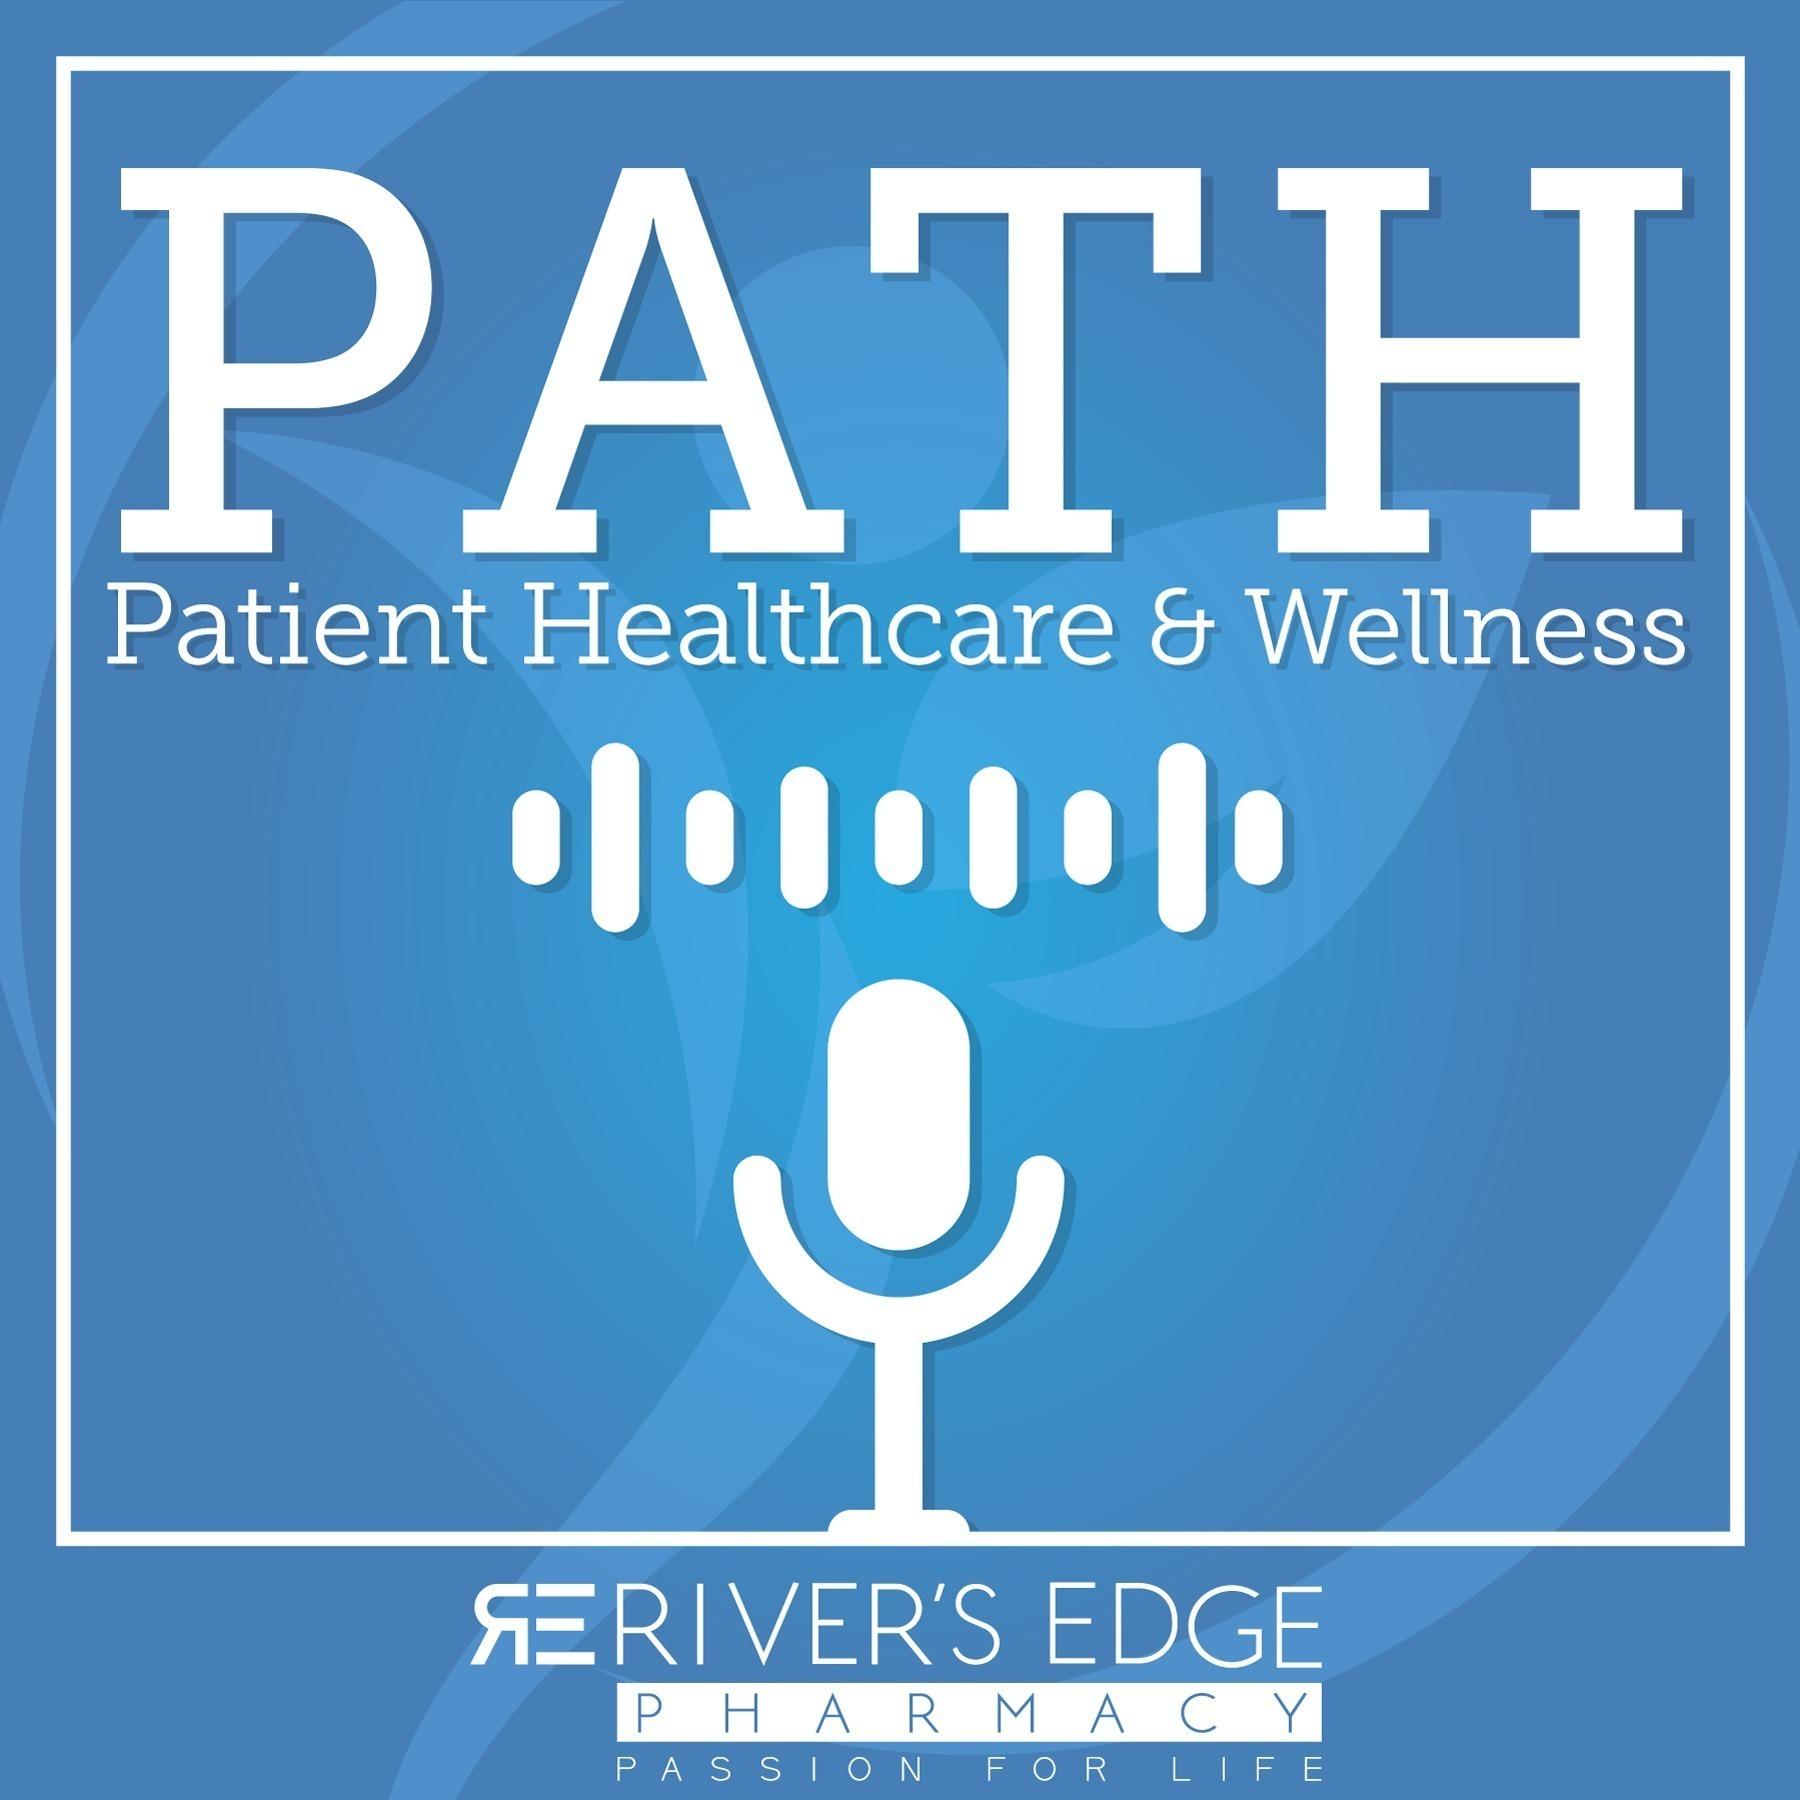 PATH - Patient Healthcare and Wellness by River's Edge Pharmacy